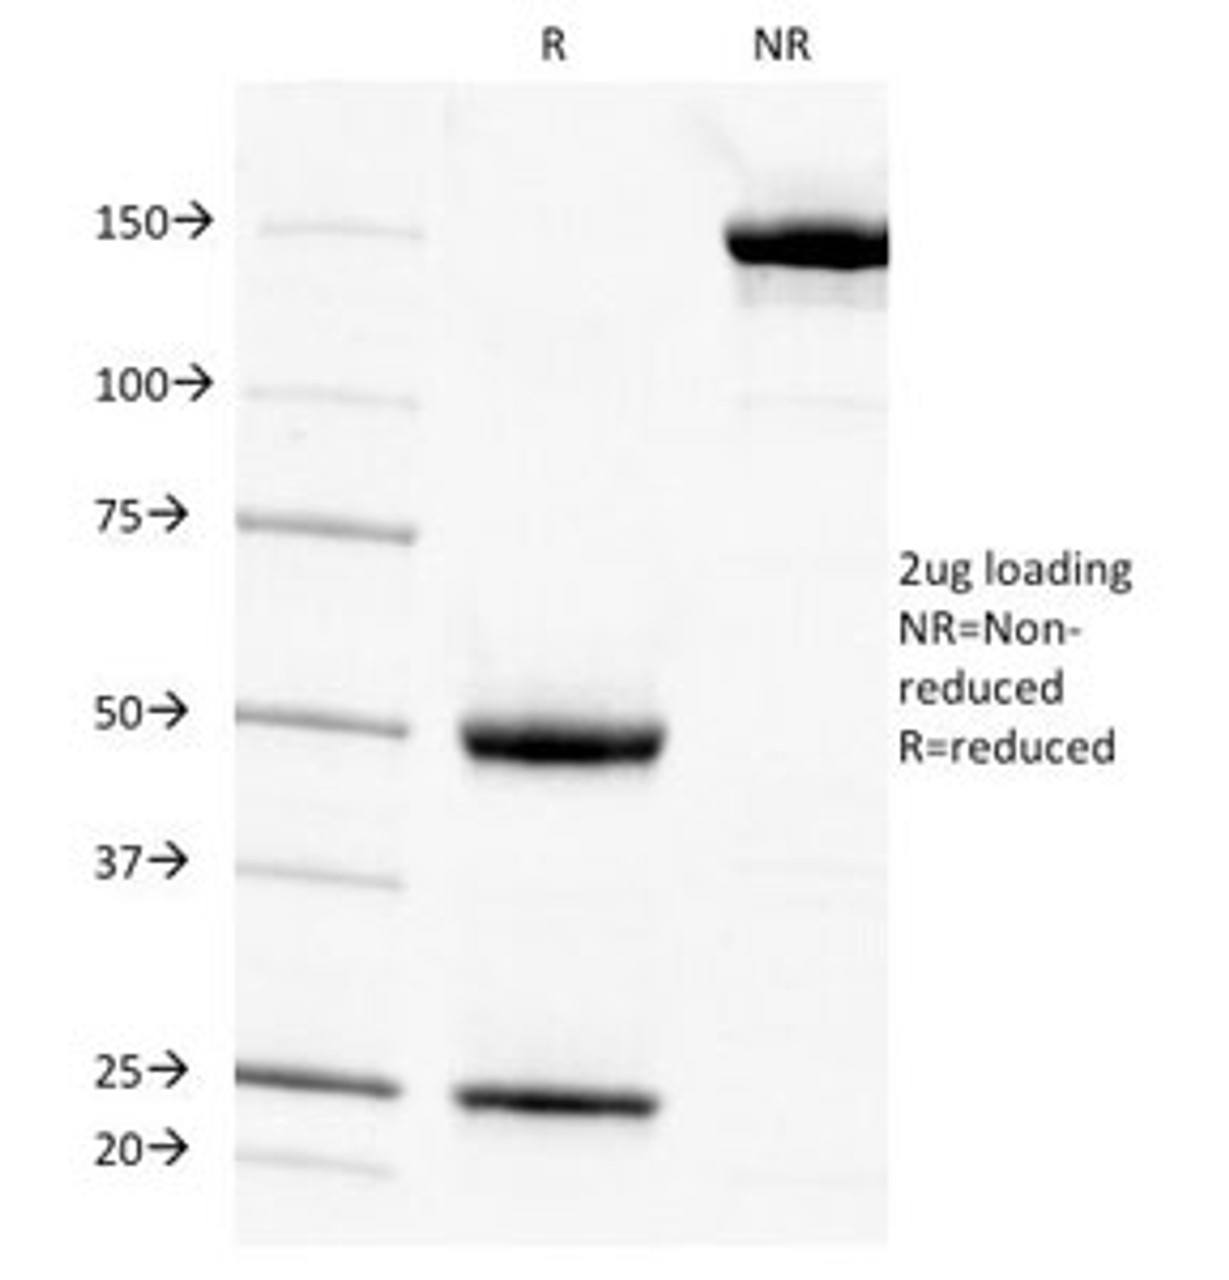 SDS-PAGE Analysis of Purified, BSA-Free Cytokeratin 7 Antibody (clone KRT7/903) . Confirmation of Integrity and Purity of the Antibody.